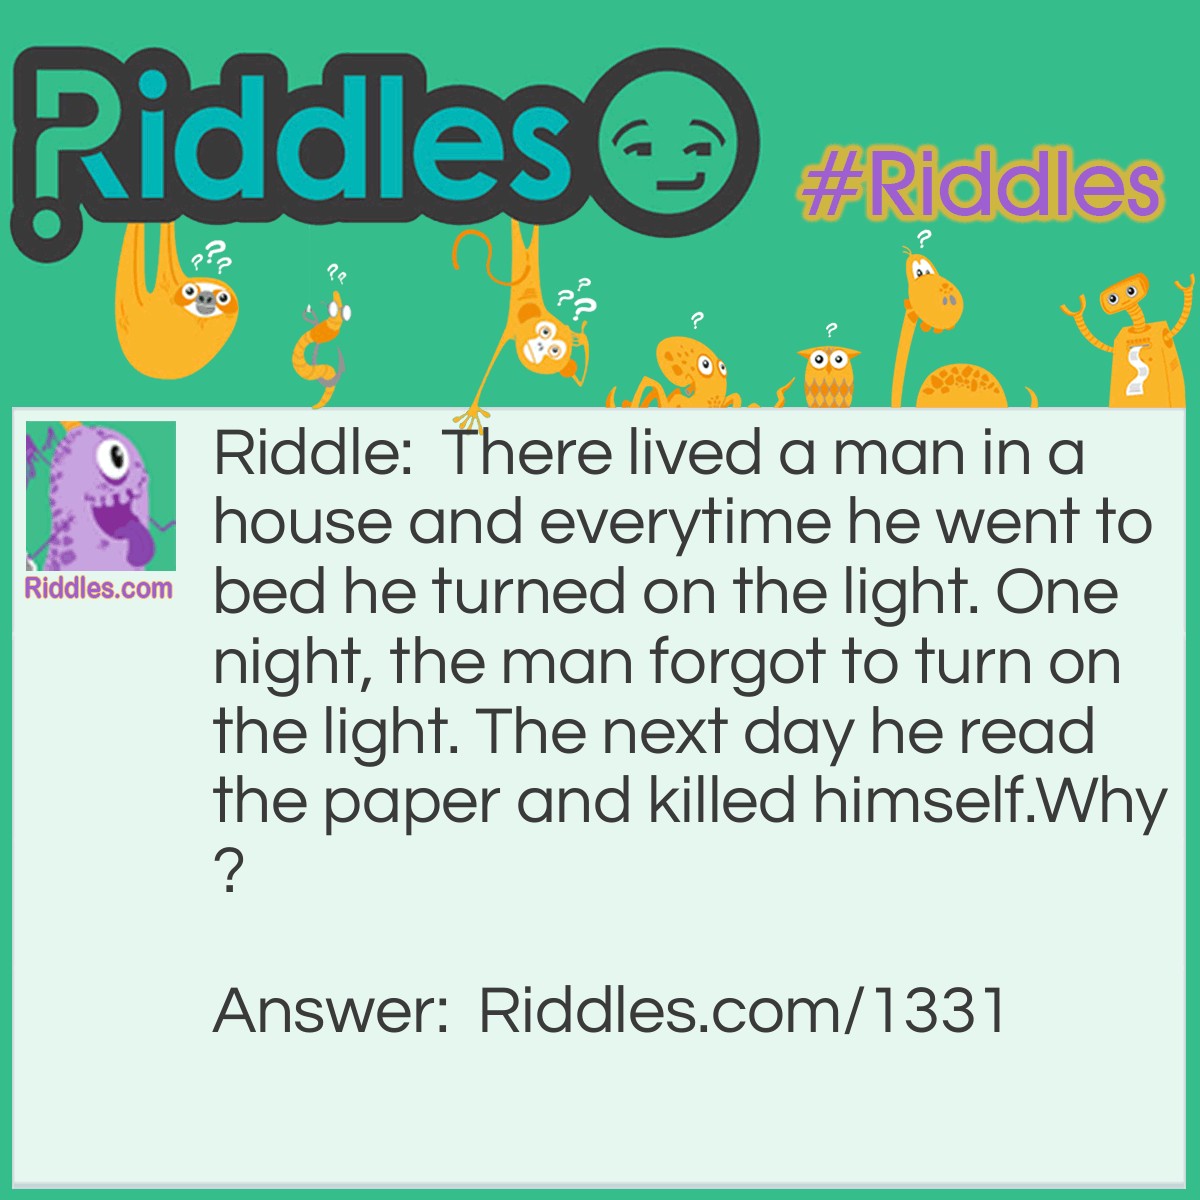 Riddle: There lived a man in a house and everytime he went to bed he turned on the light. One night, the man forgot to turn on the light. The next day he read the paper and killed himself.
Why? Answer: The man lived in a lighthouse. He forgot to turn on the light and a ship crashed. The next morning he read in the paper that the ship crashed and killed himself because he felt guilty.